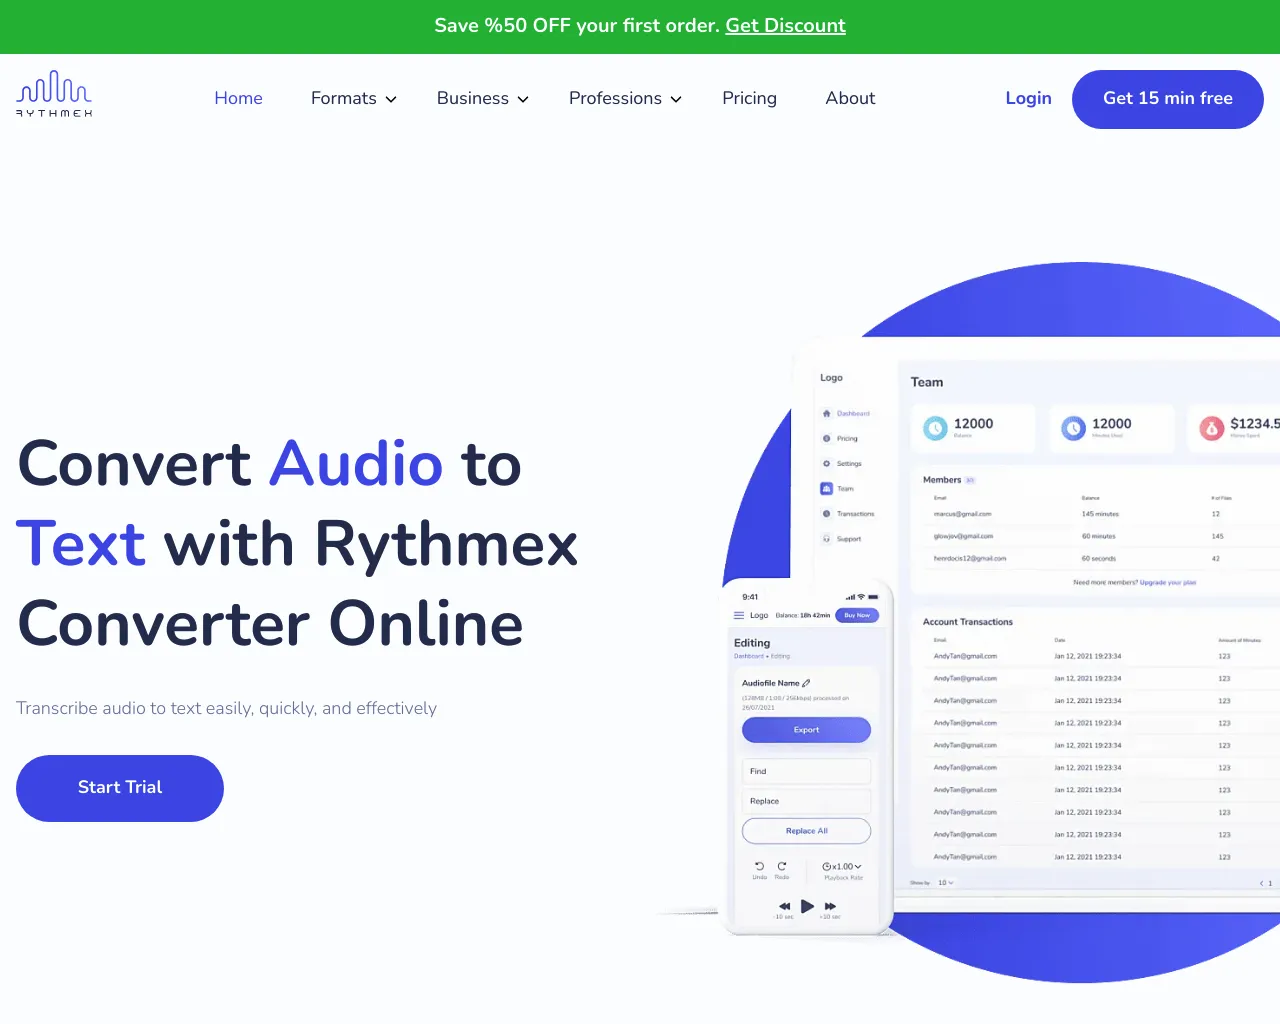 Convert Audio to Text With Rythmex Converter